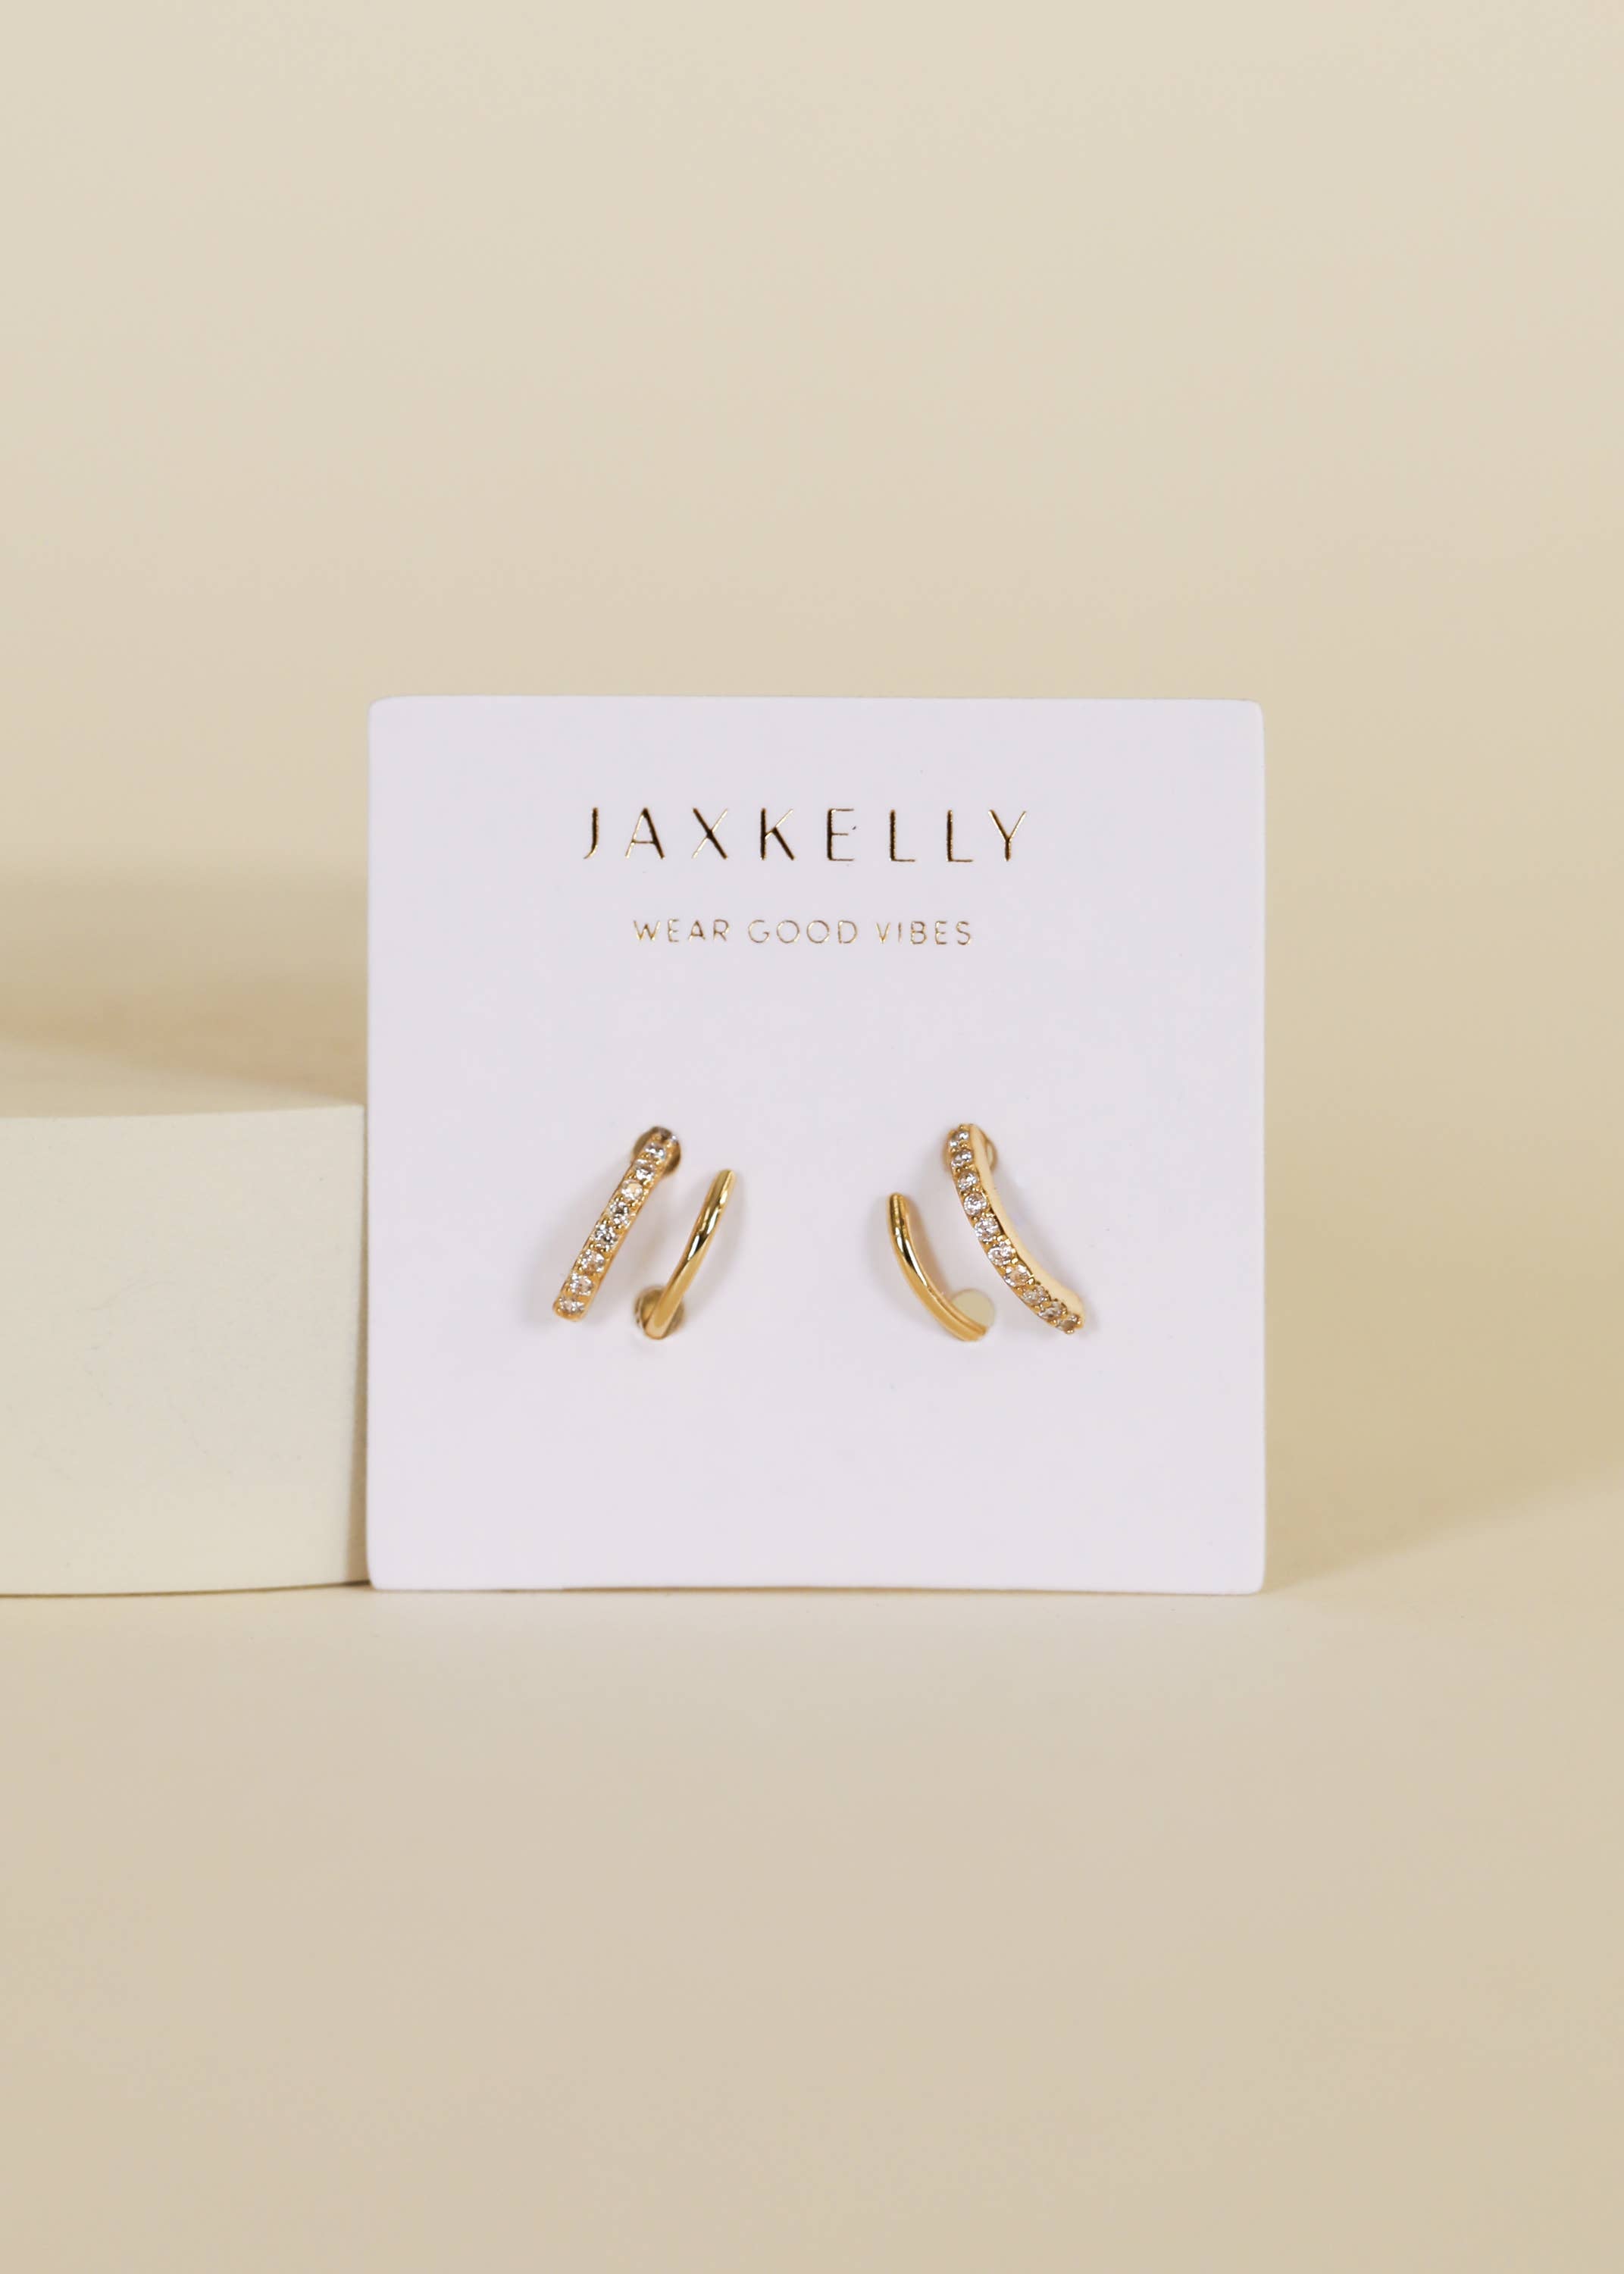 JaxKelly - Pave Spiral - Earring